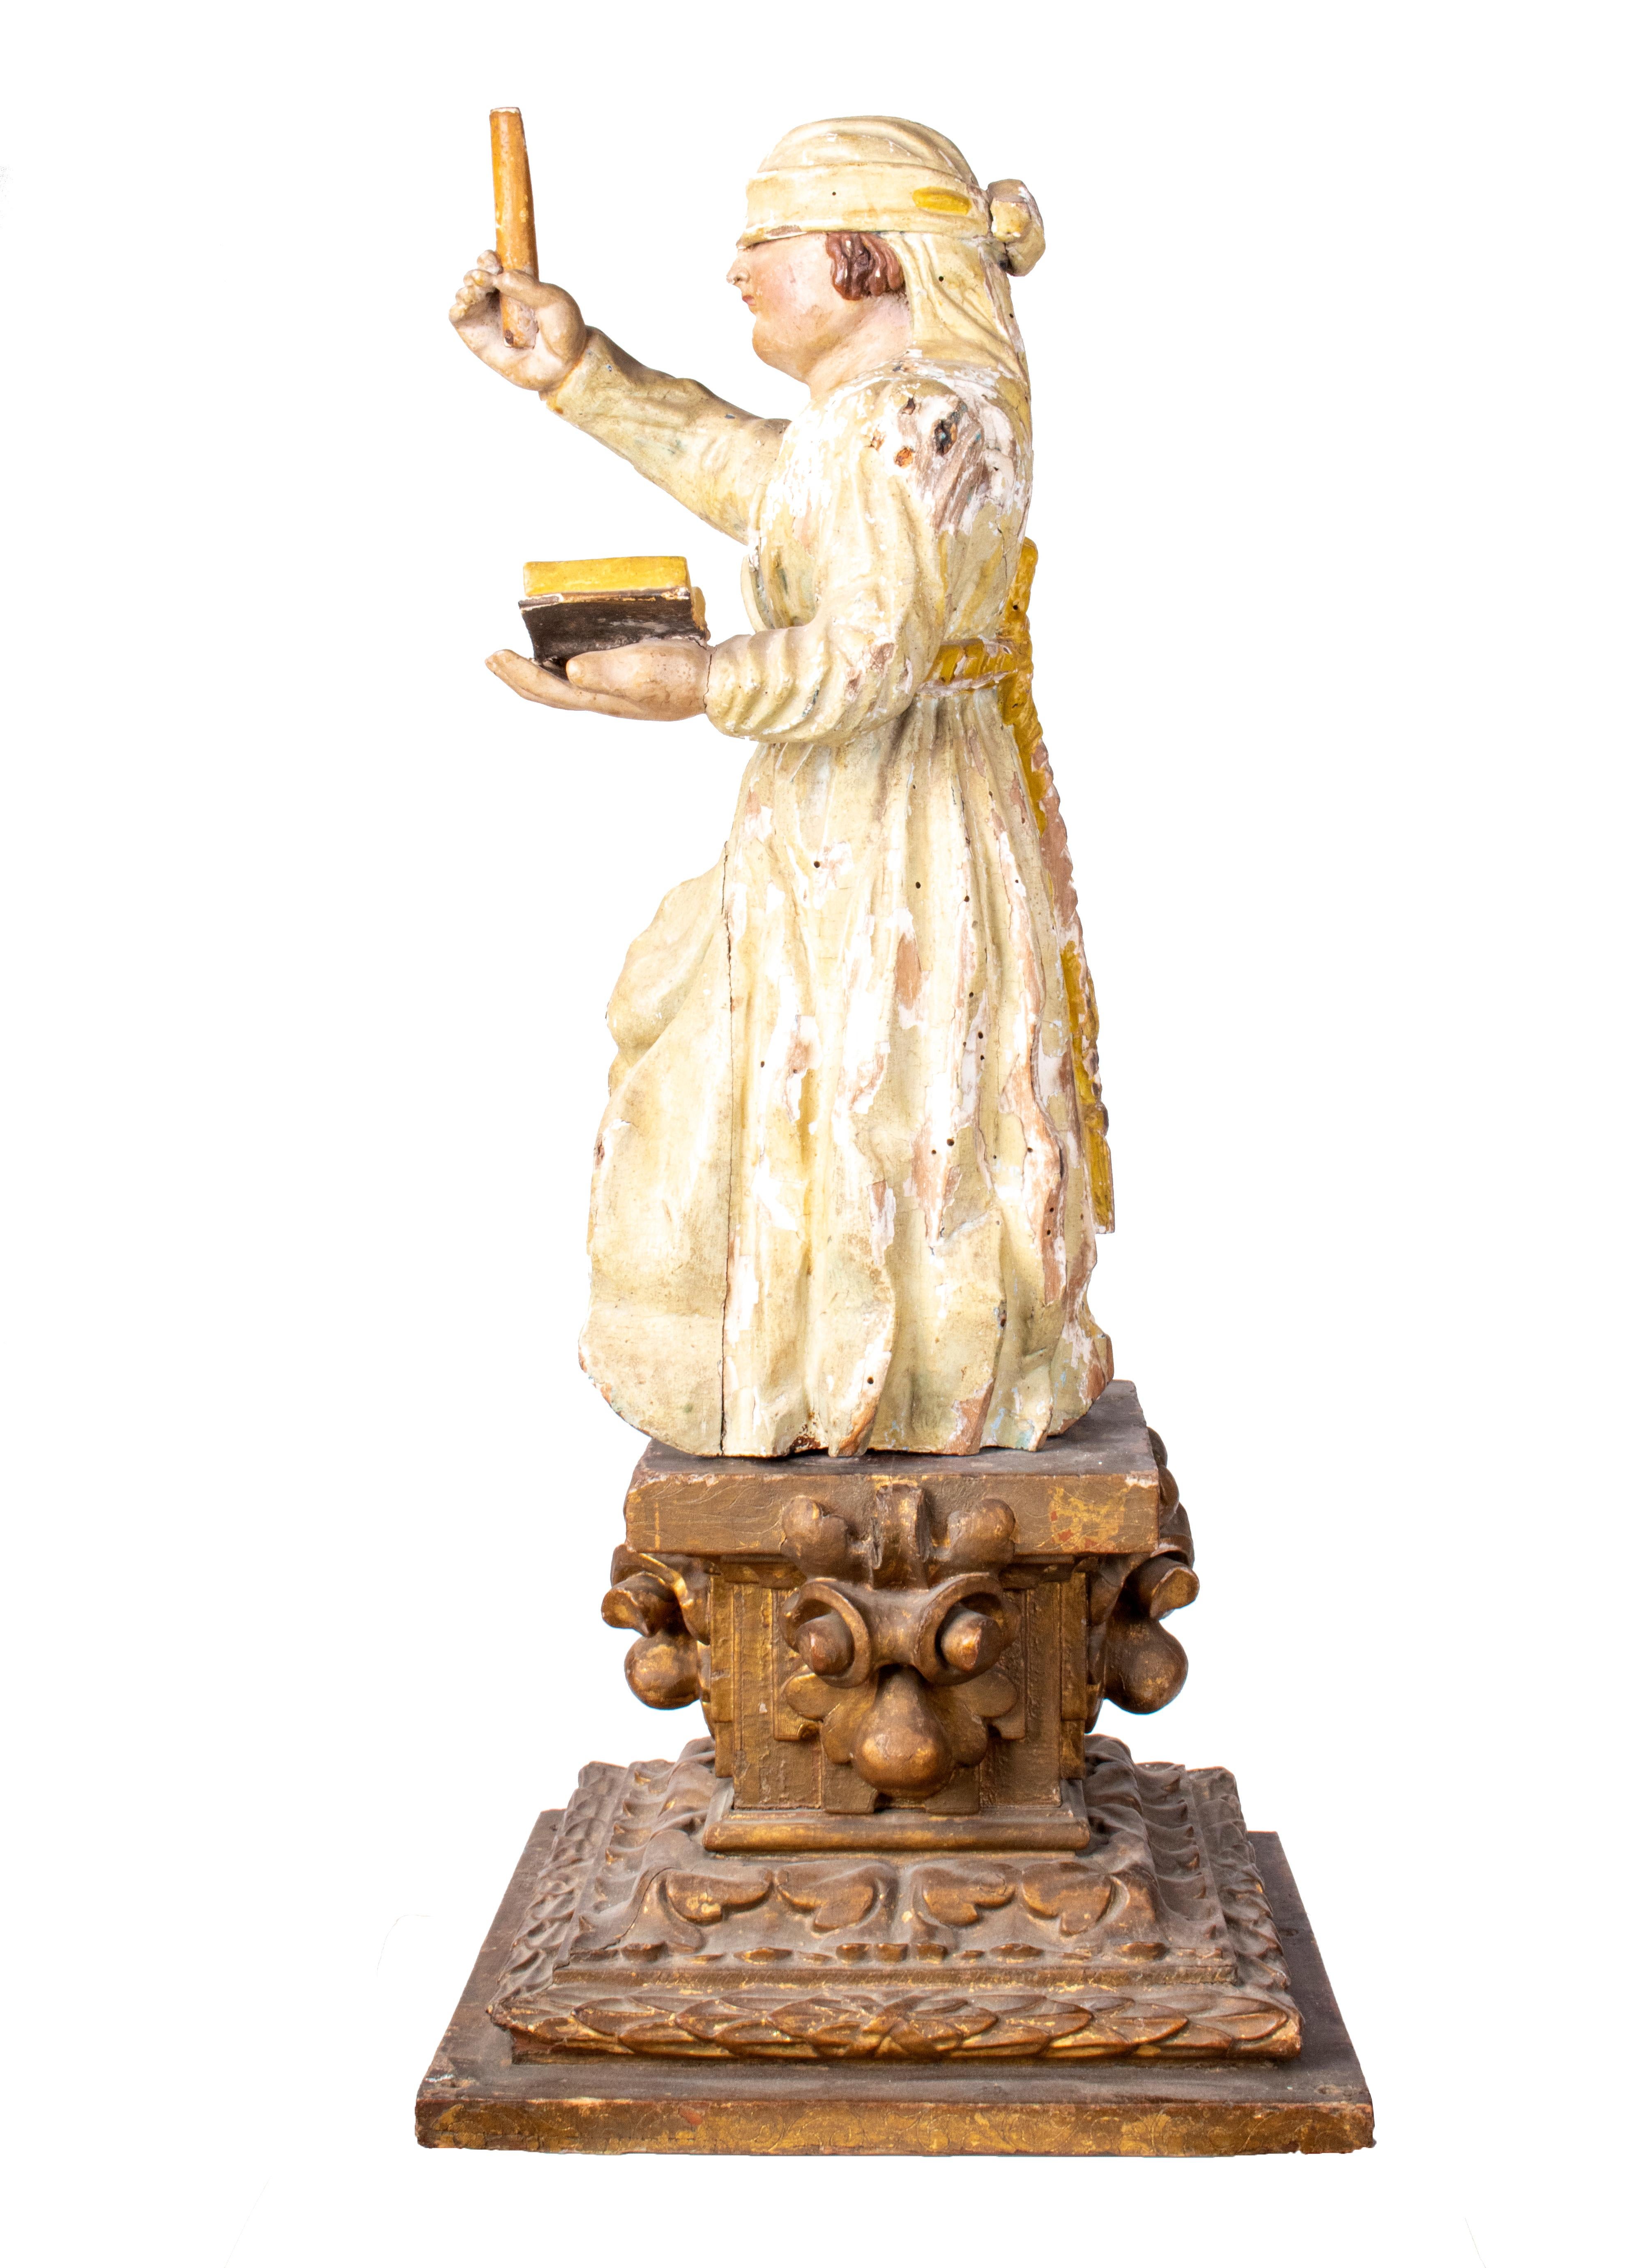 Hand-Carved 17th Century European Justitia Wooden Sculpture Standing on Gold Gilded Pedestal For Sale